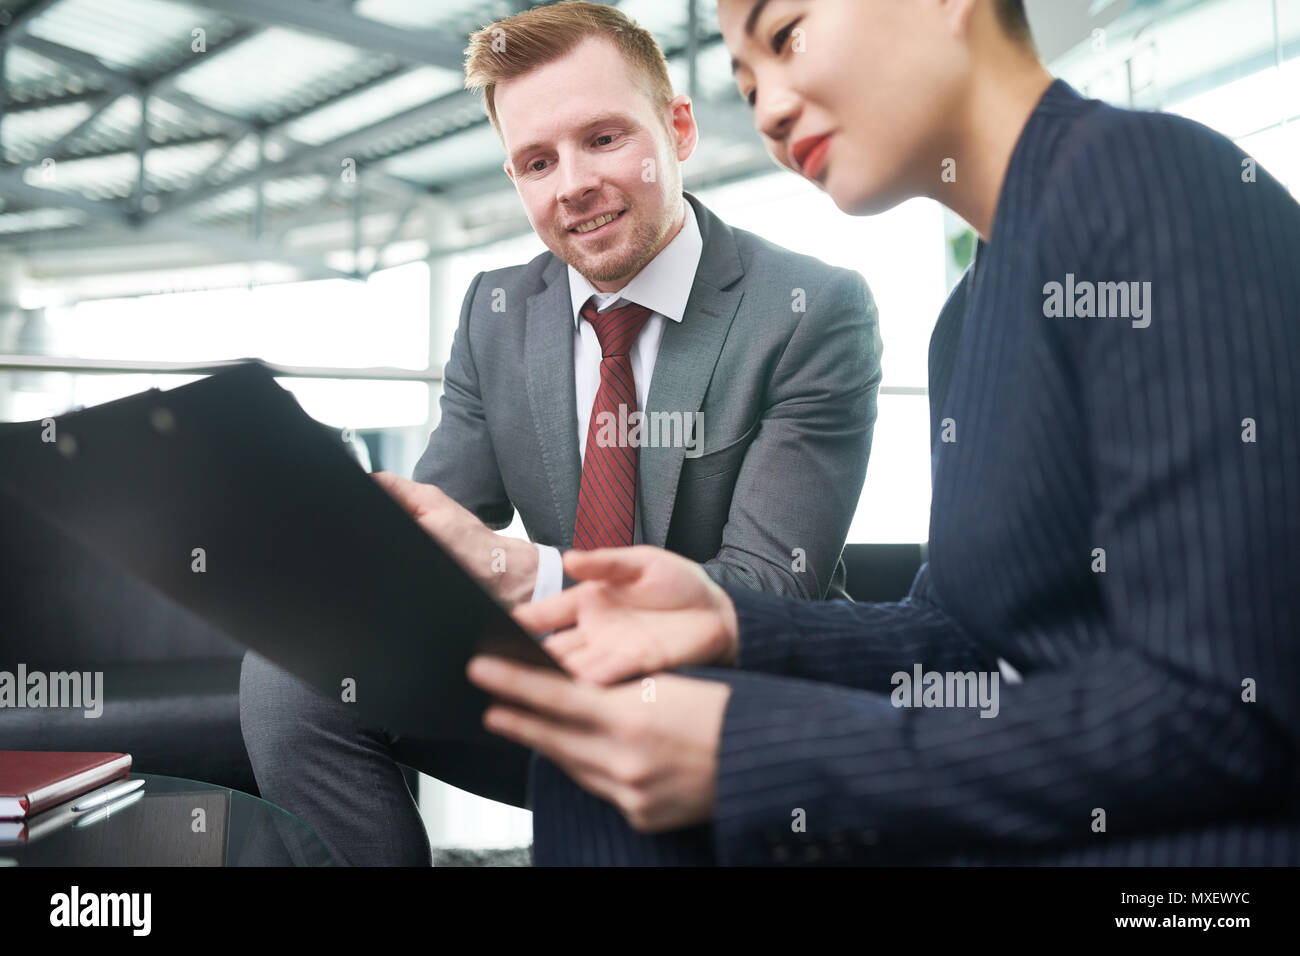 Financial Managers Wrapped up in Work Stock Photo